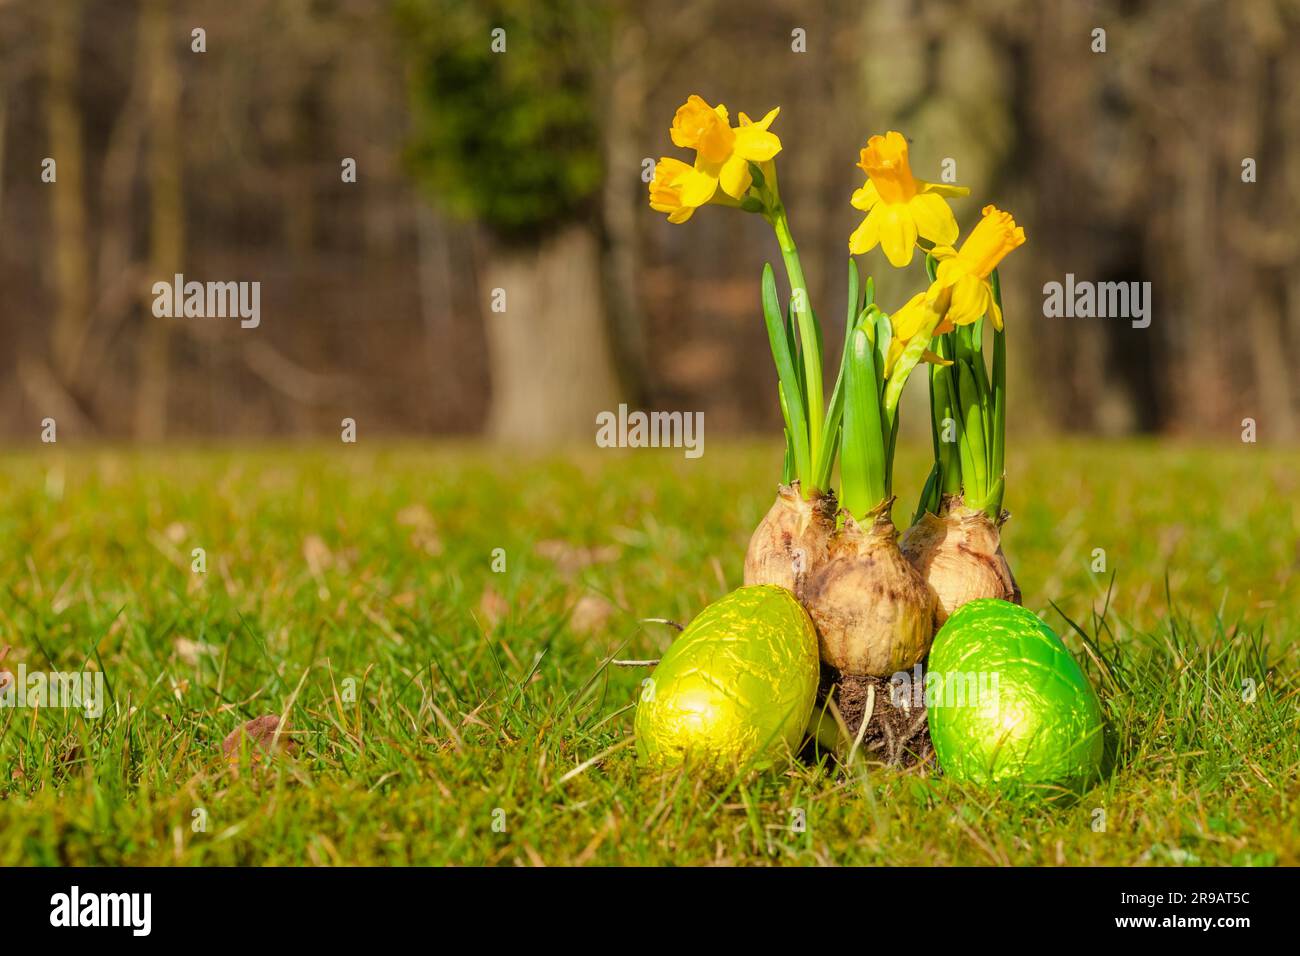 Easter eggs and daffodils in a park Stock Photo